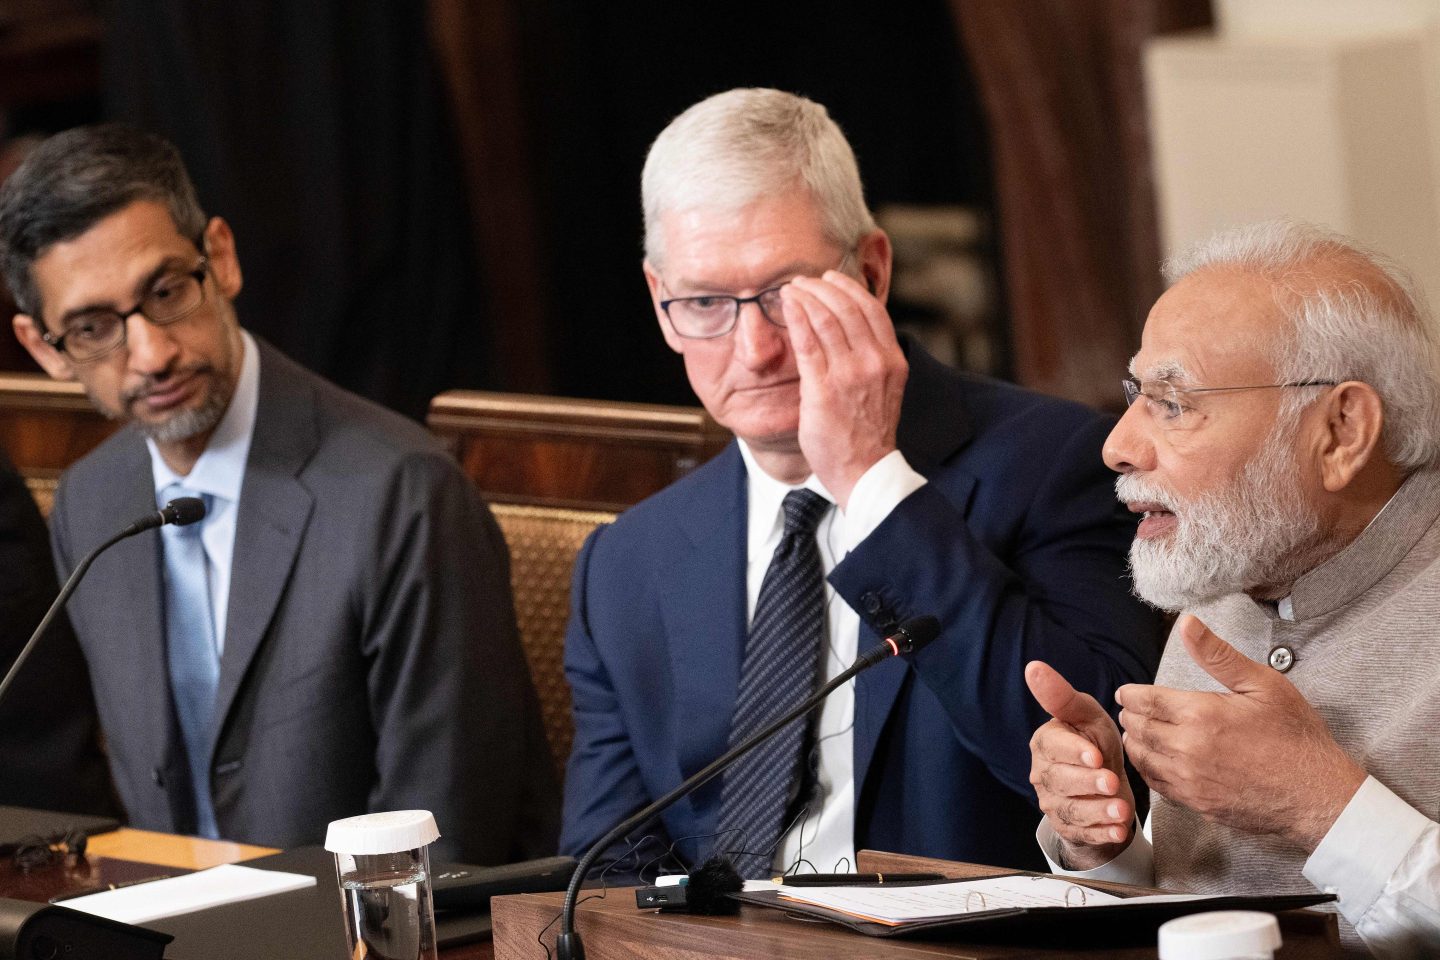 Google CEO Sundar Pichai and Apple CEO Tim Cook look on as India's Prime Minister Narendra Modi speaks during a meeting with senior officials and CEOs of American and Indian companies, in the East Room the White House in Washington, DC, on June 23, 2023.